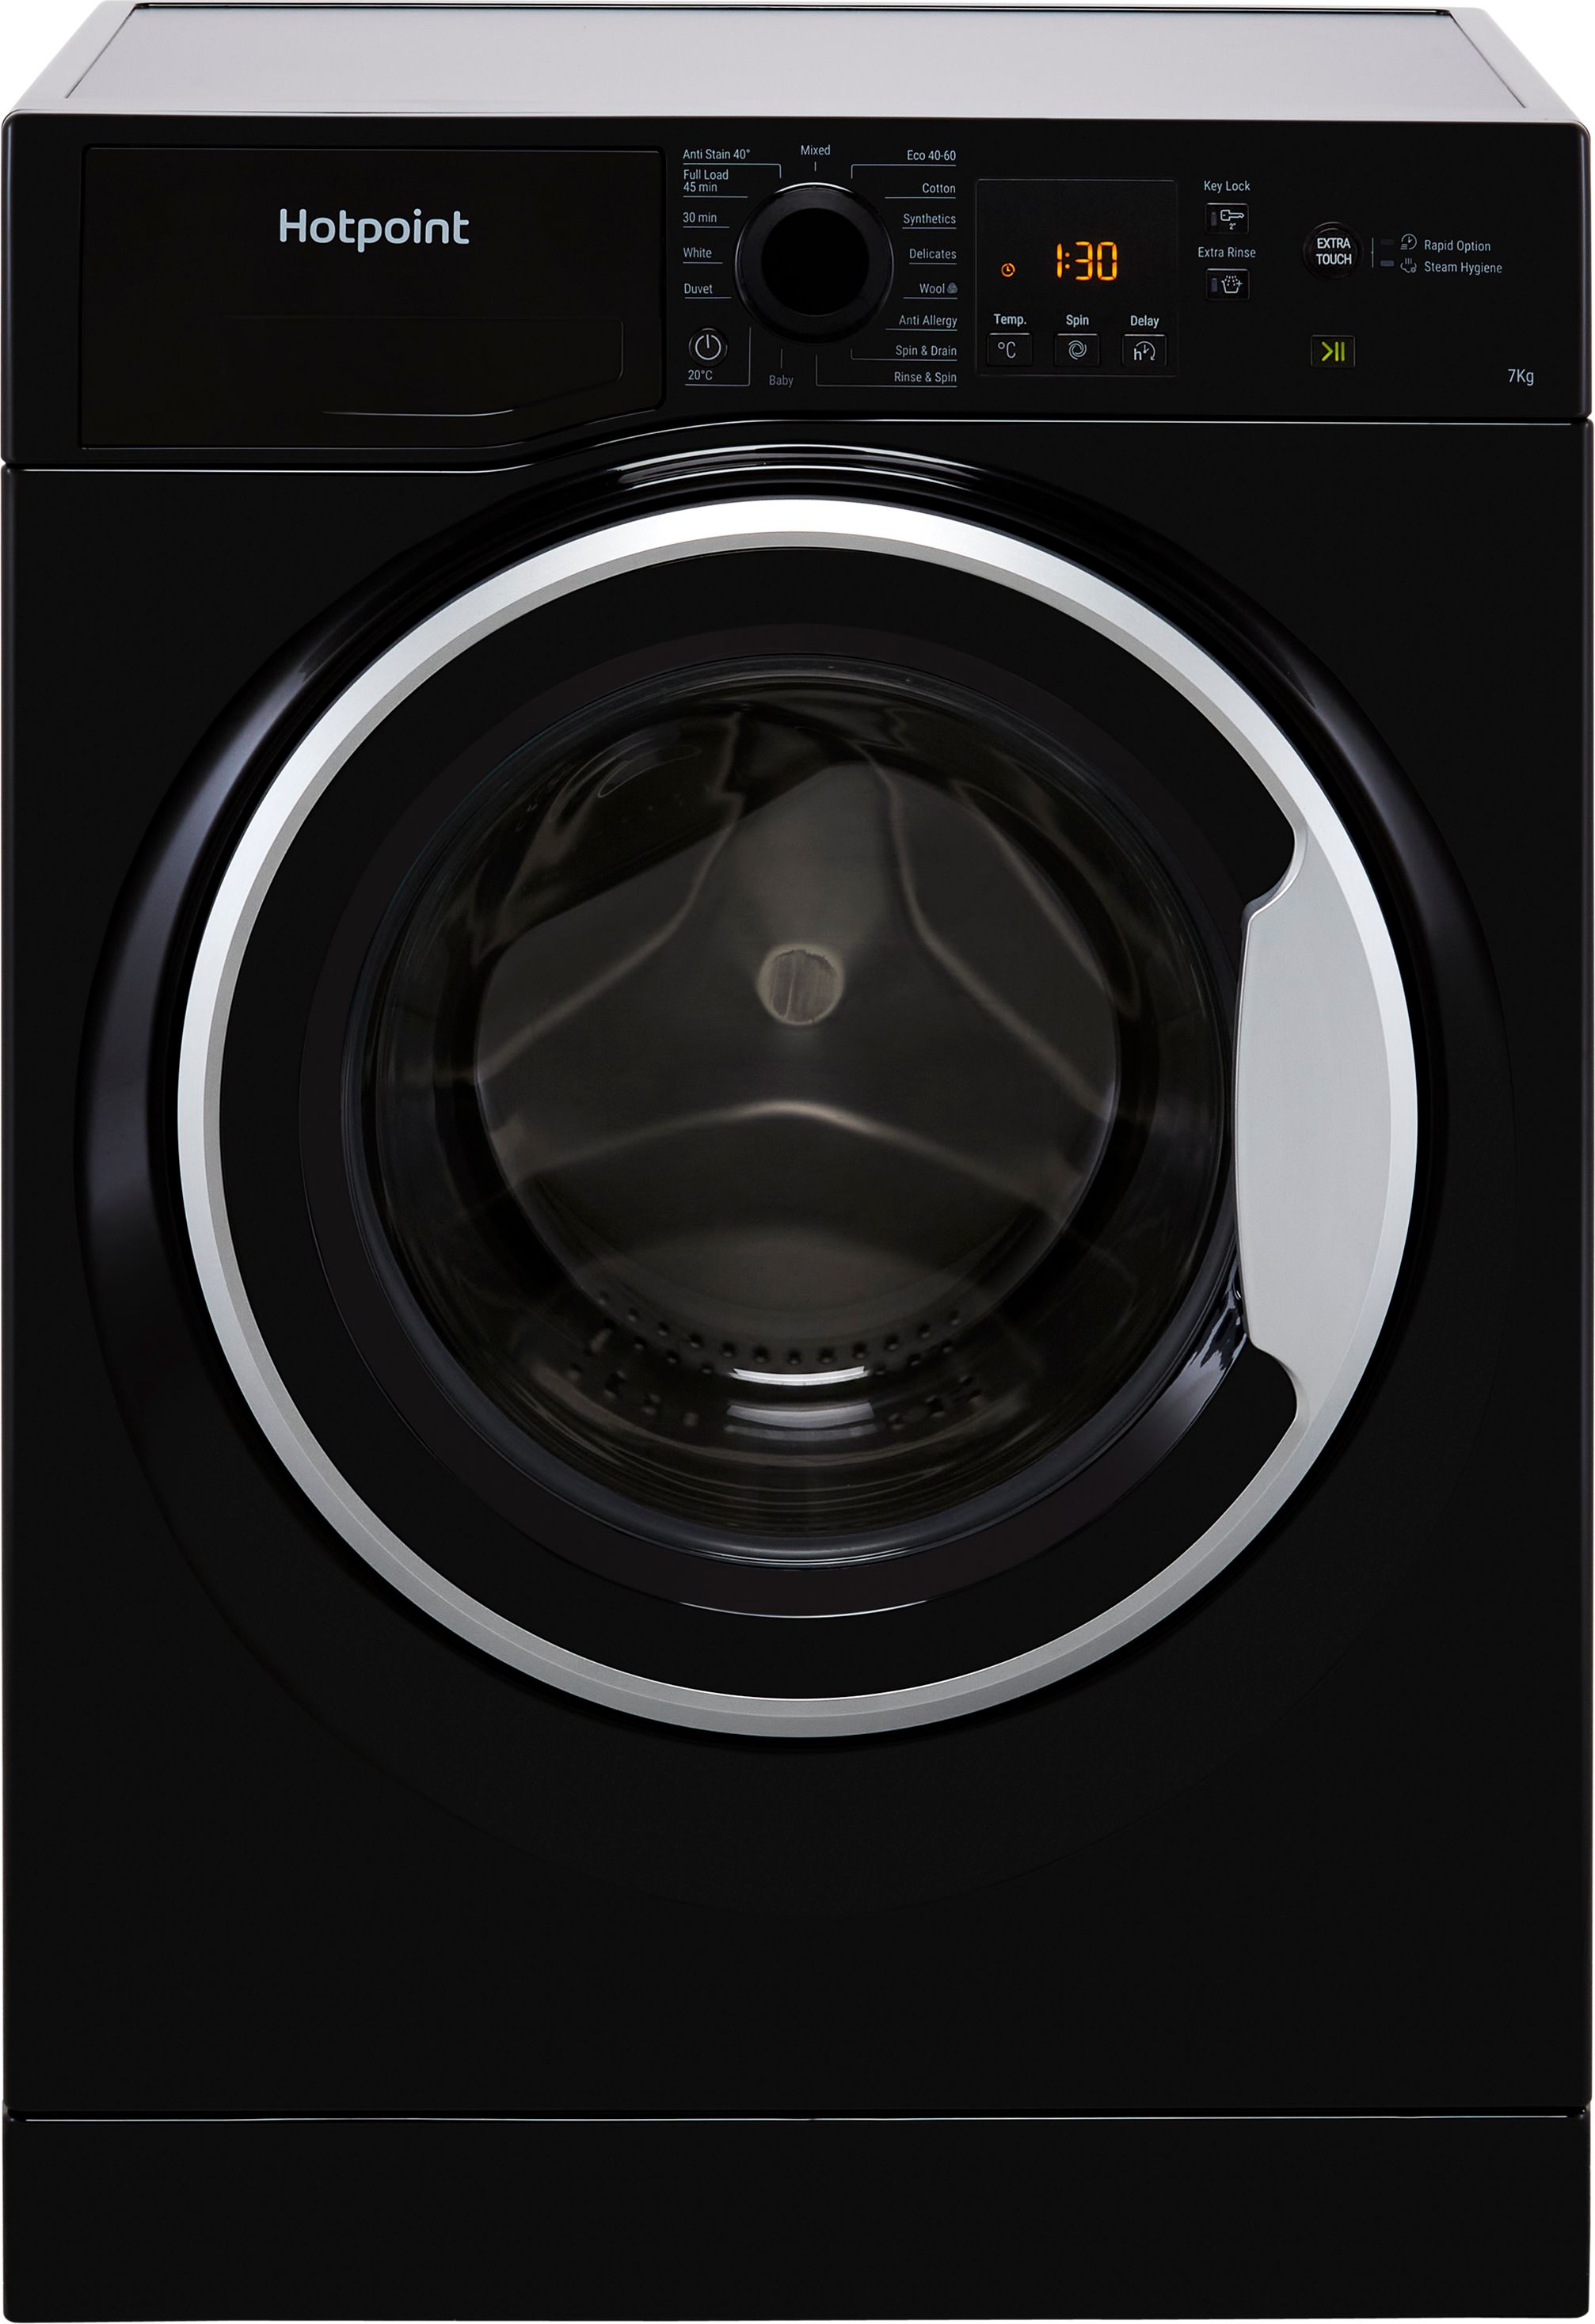 Hotpoint NSWM743UBSUKN 7kg Washing Machine with 1400 rpm - Black - D Rated, Black